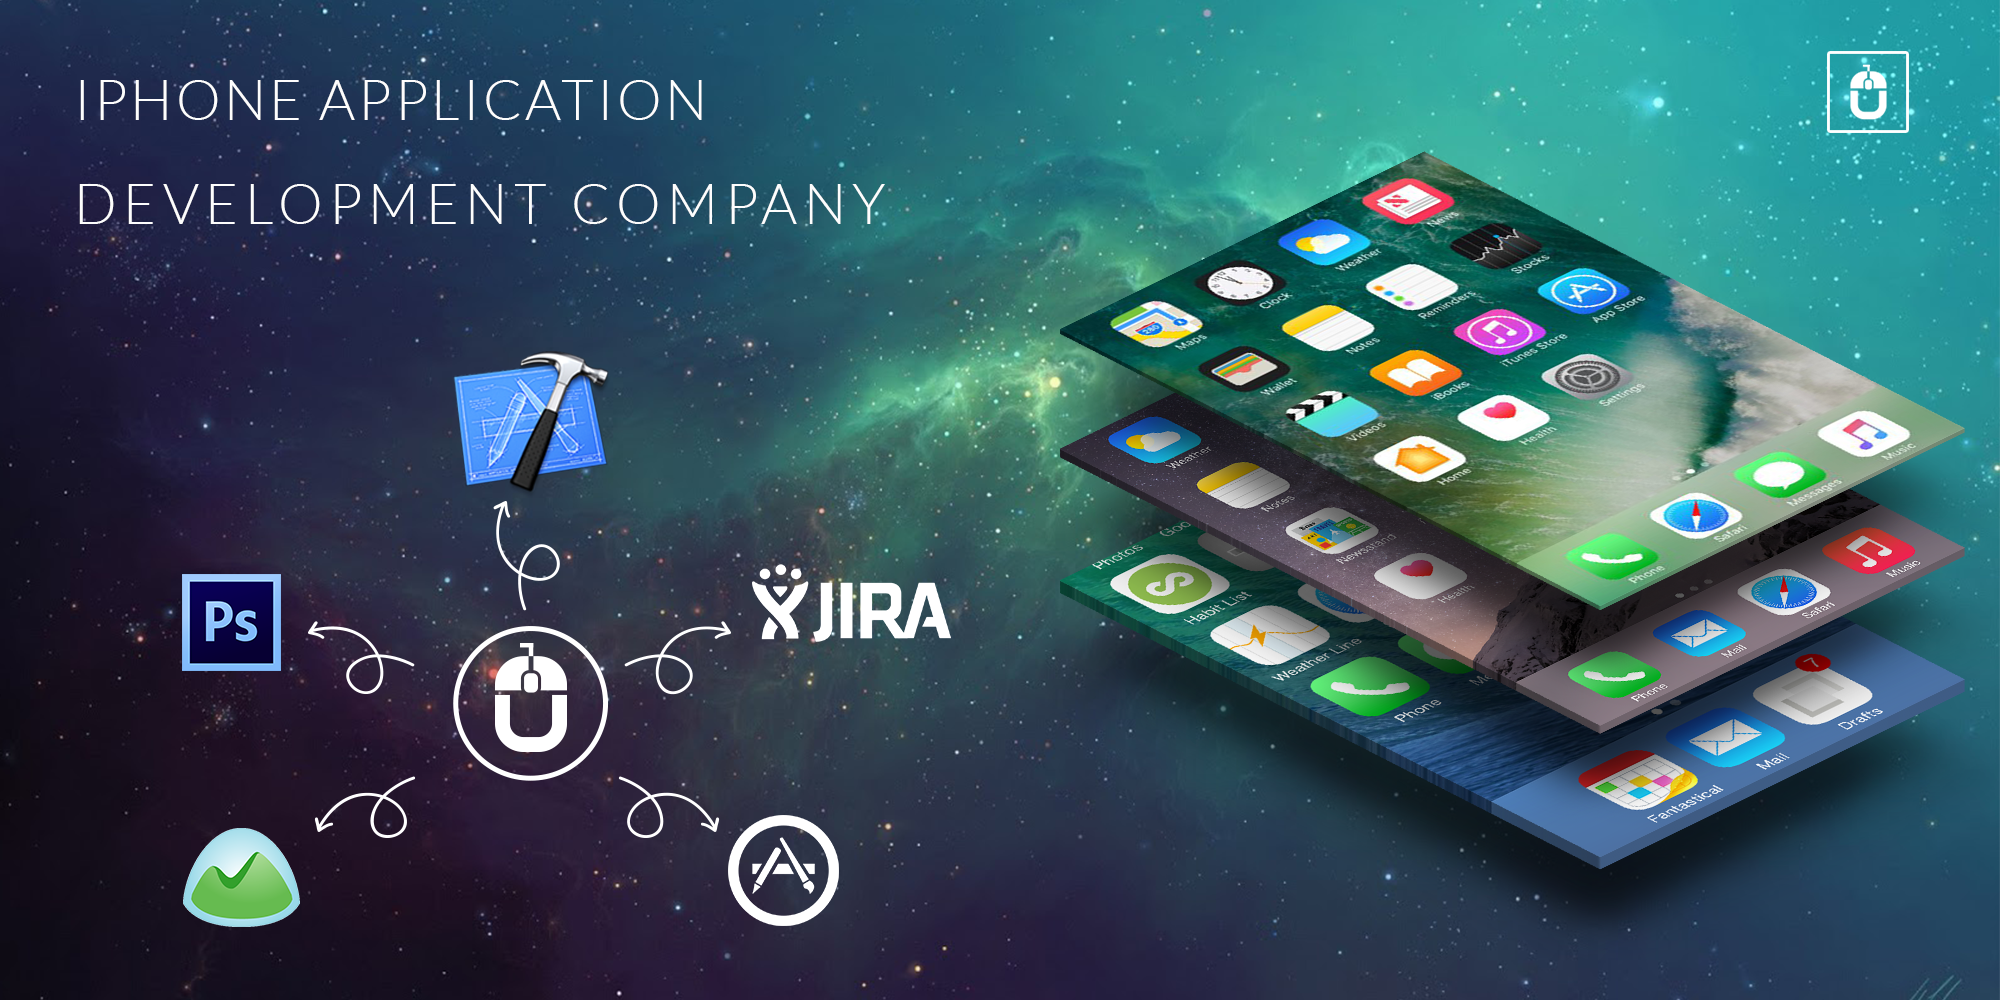 iphone application development company in india